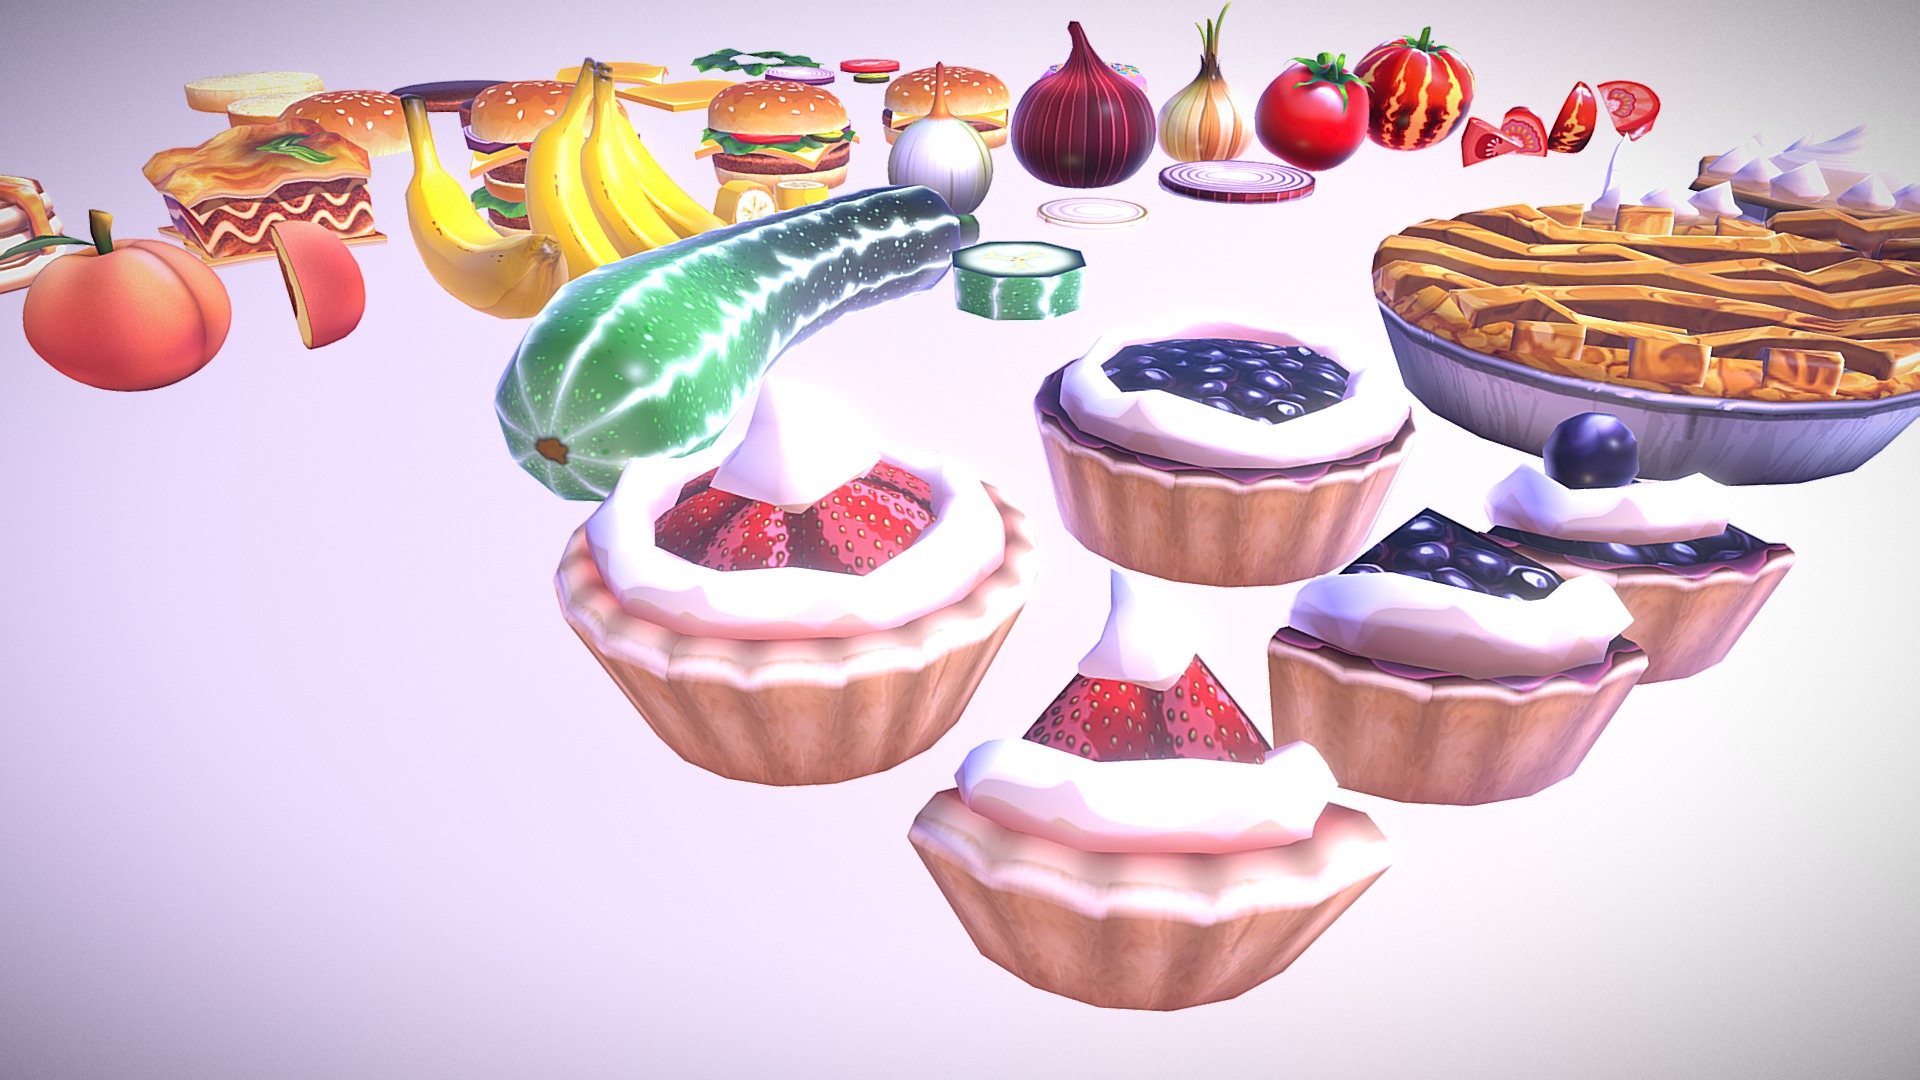 3D model LOW POLY – Cartoon Food Pack - This is a 3D model of the LOW POLY - Cartoon Food Pack. The 3D model is about a group of colorful desserts.